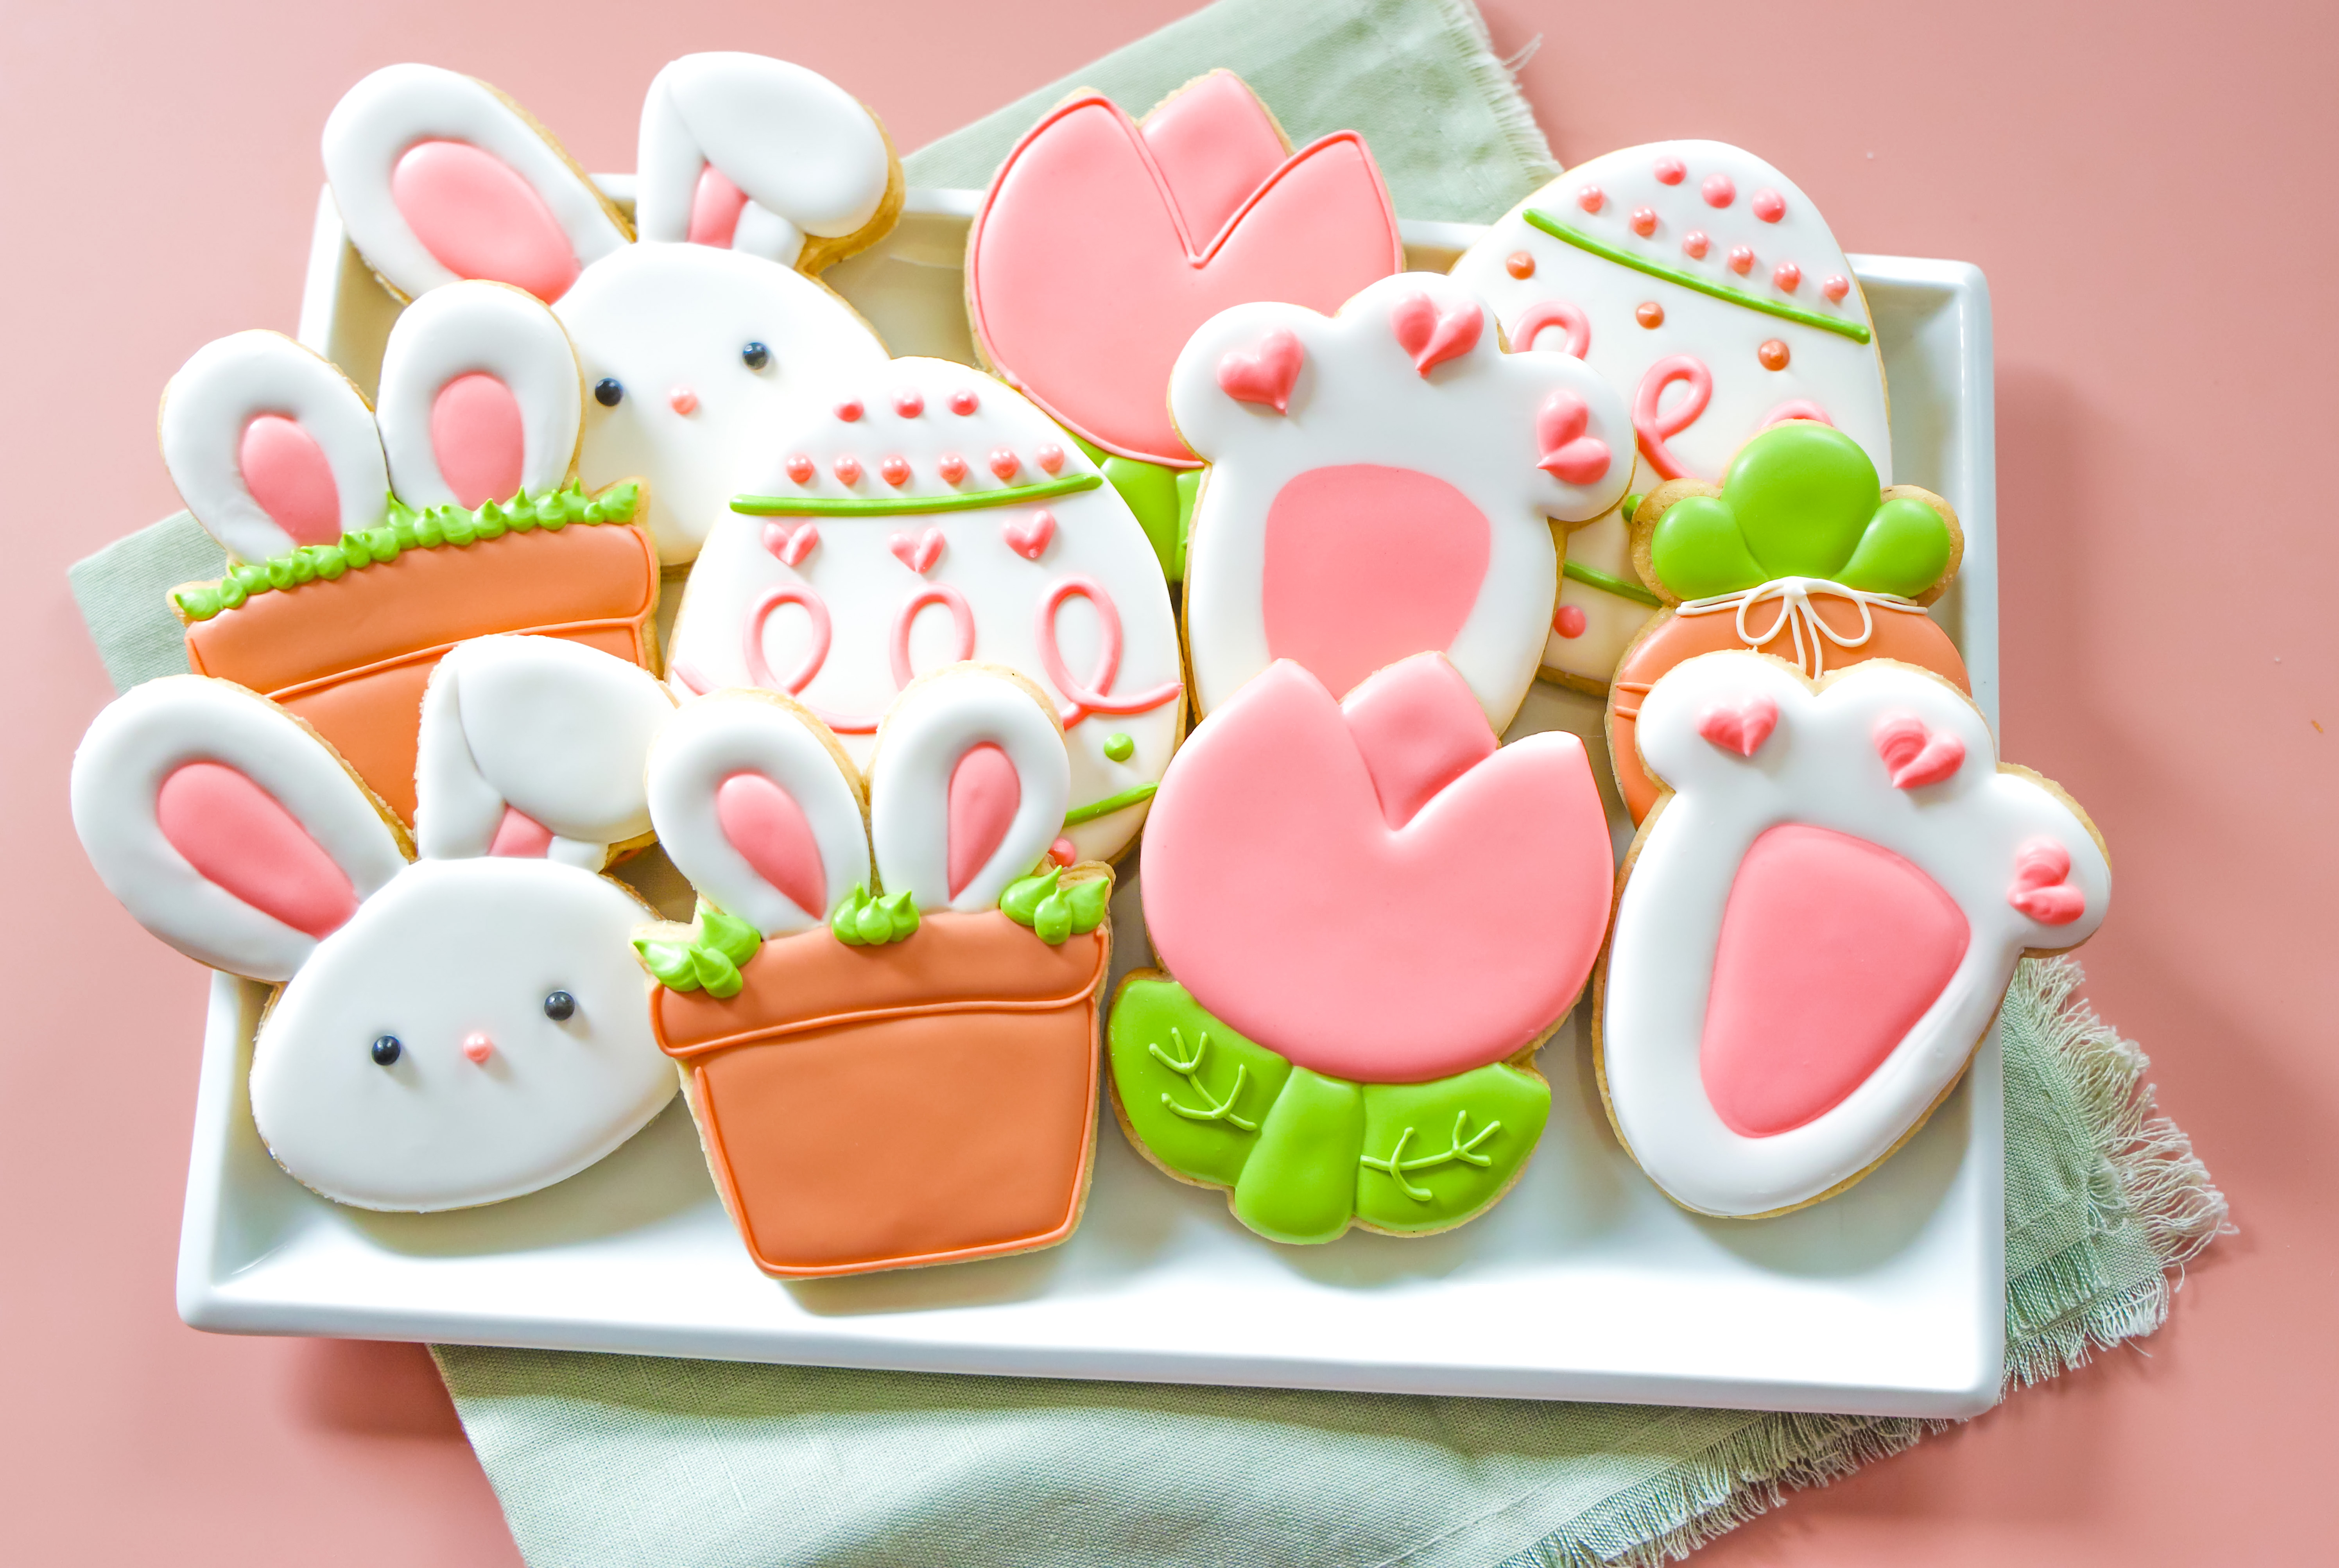 CLASS COOKIE DECORATING: Mar. 16 - 10AM Jumpin' Into Easter - Cookie Decorating Class